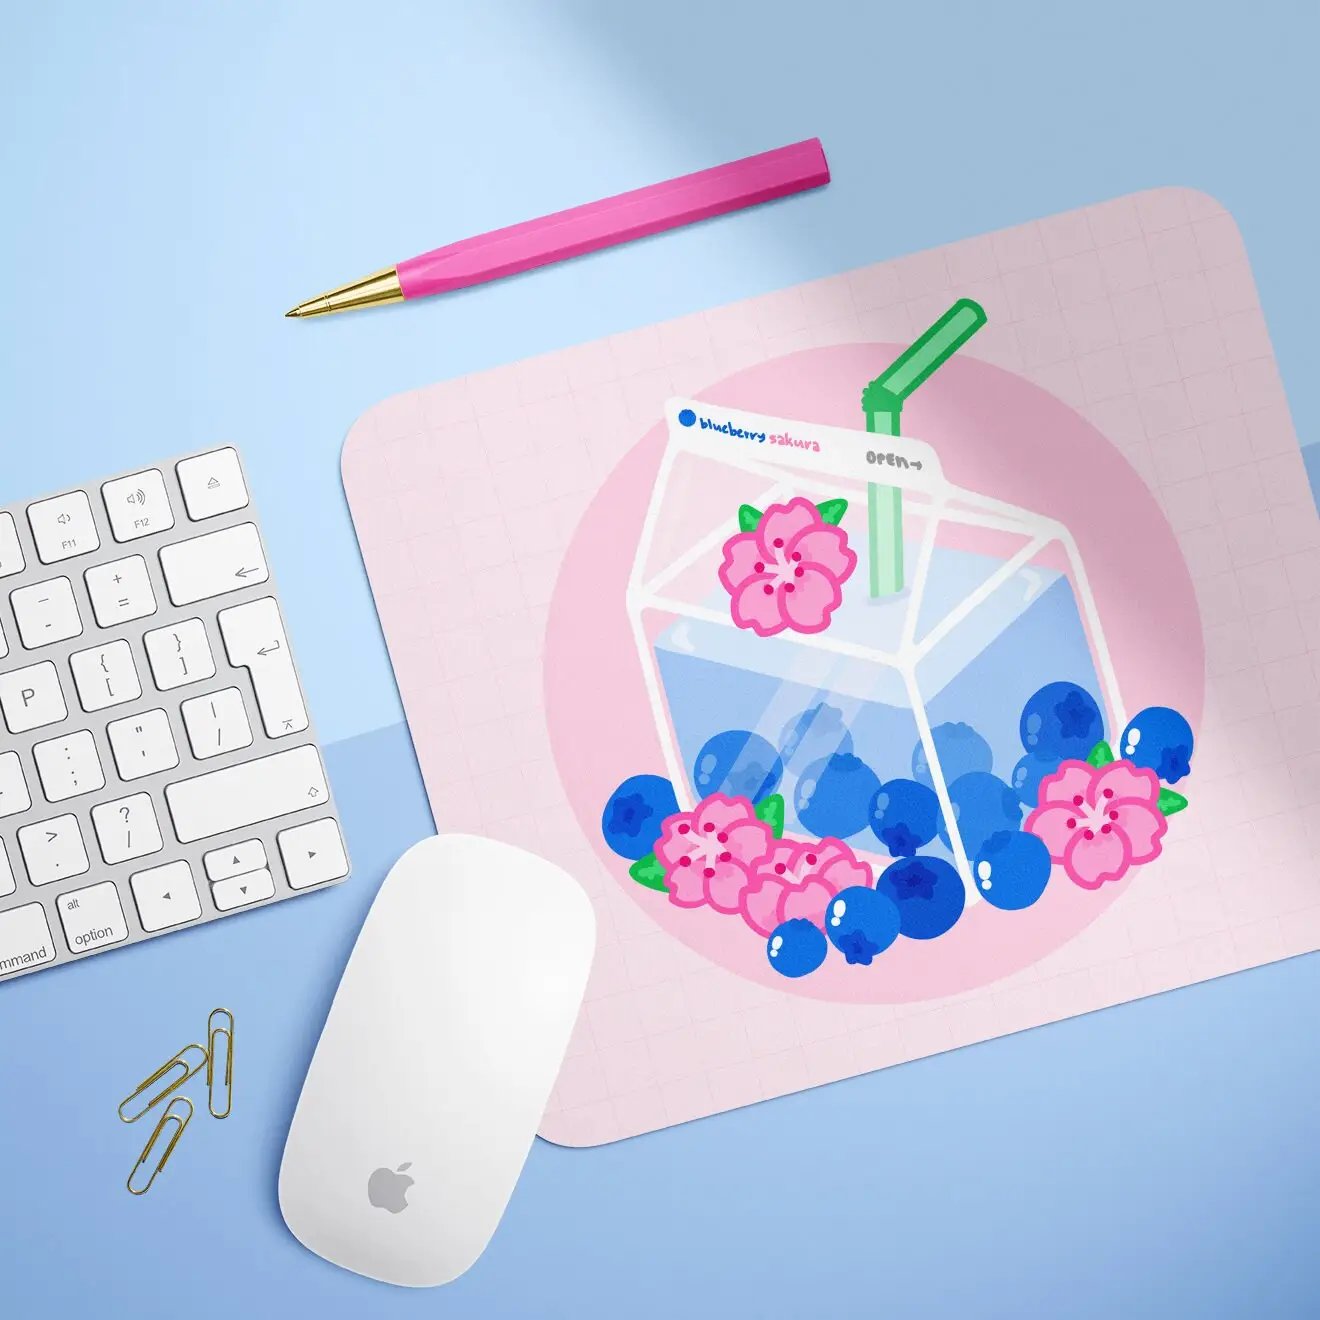 a mouse pad with a picture of a drink and blueberries on it